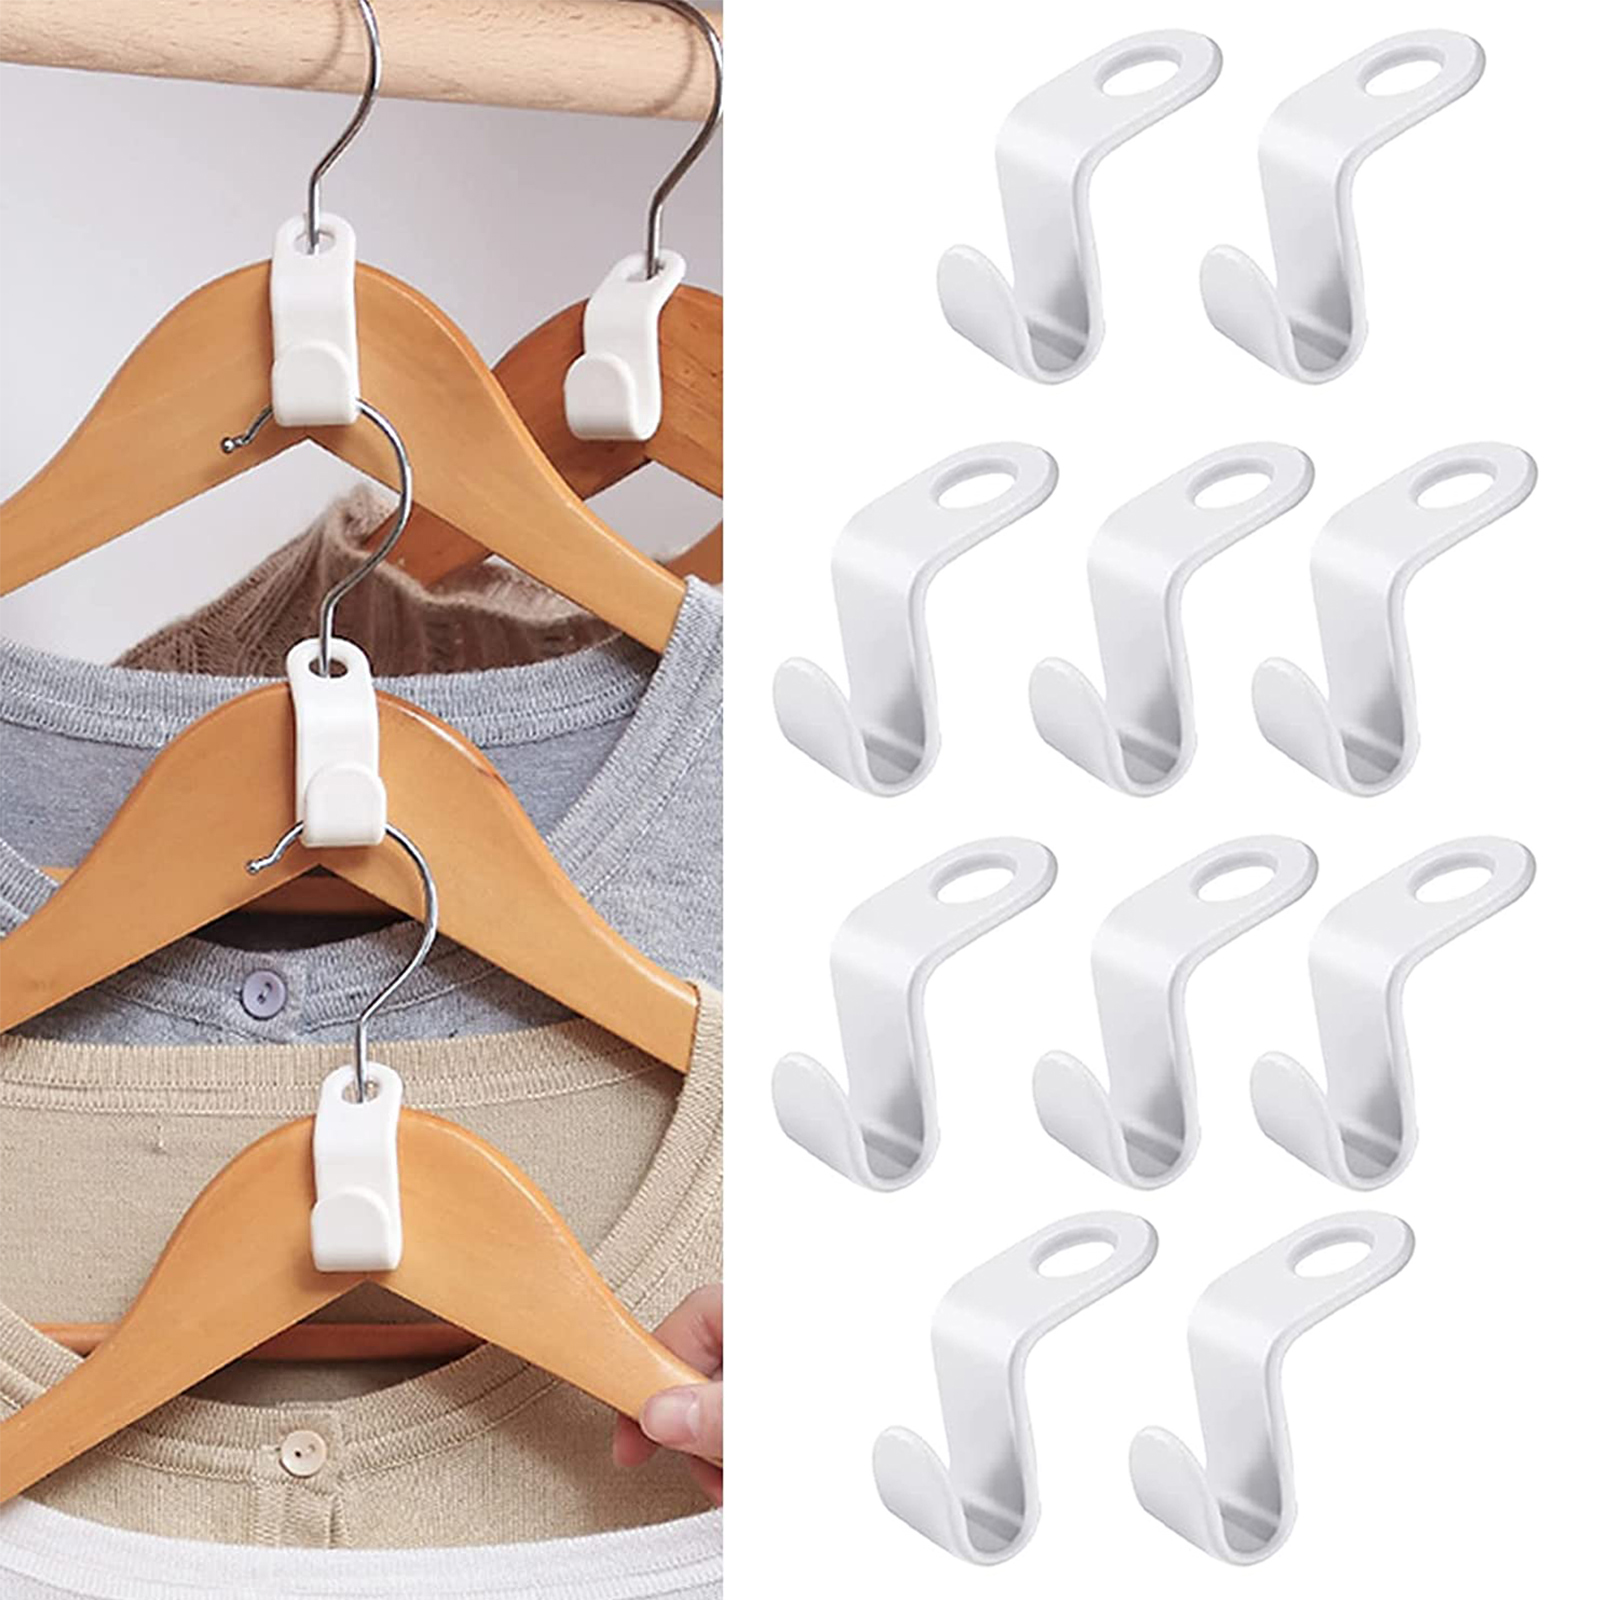 Clothes Hanger Connector Hooks from